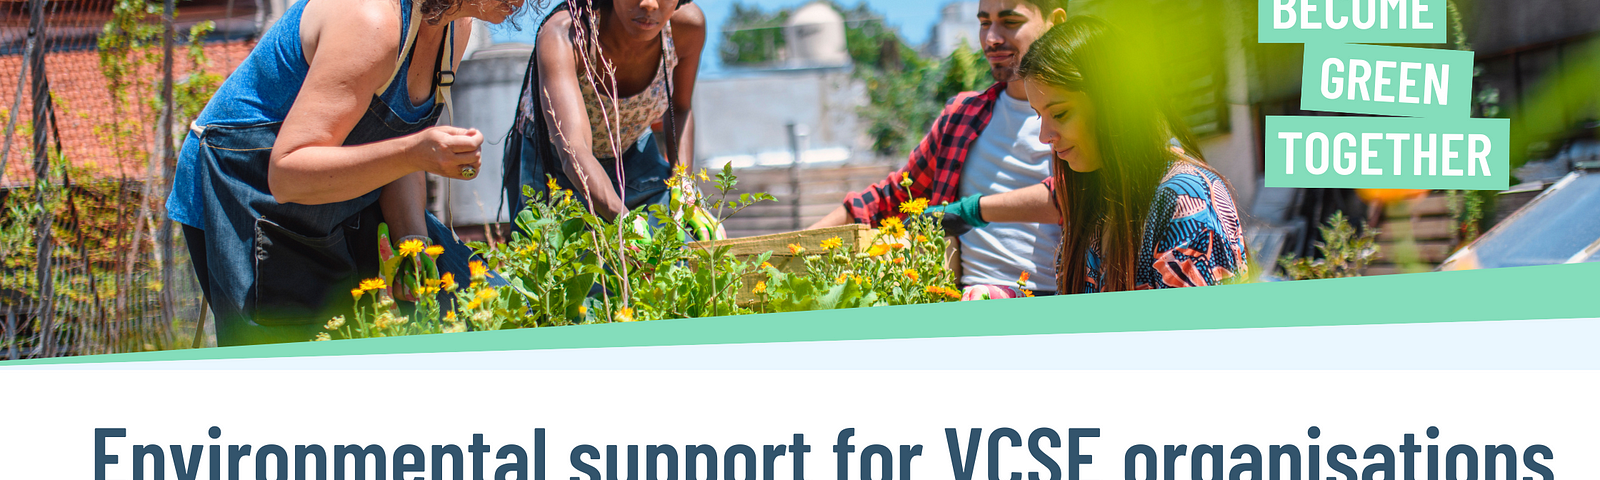 Four people work together to tend a community garden. The text below reads: environmental support for VCSE organisations in County Durham